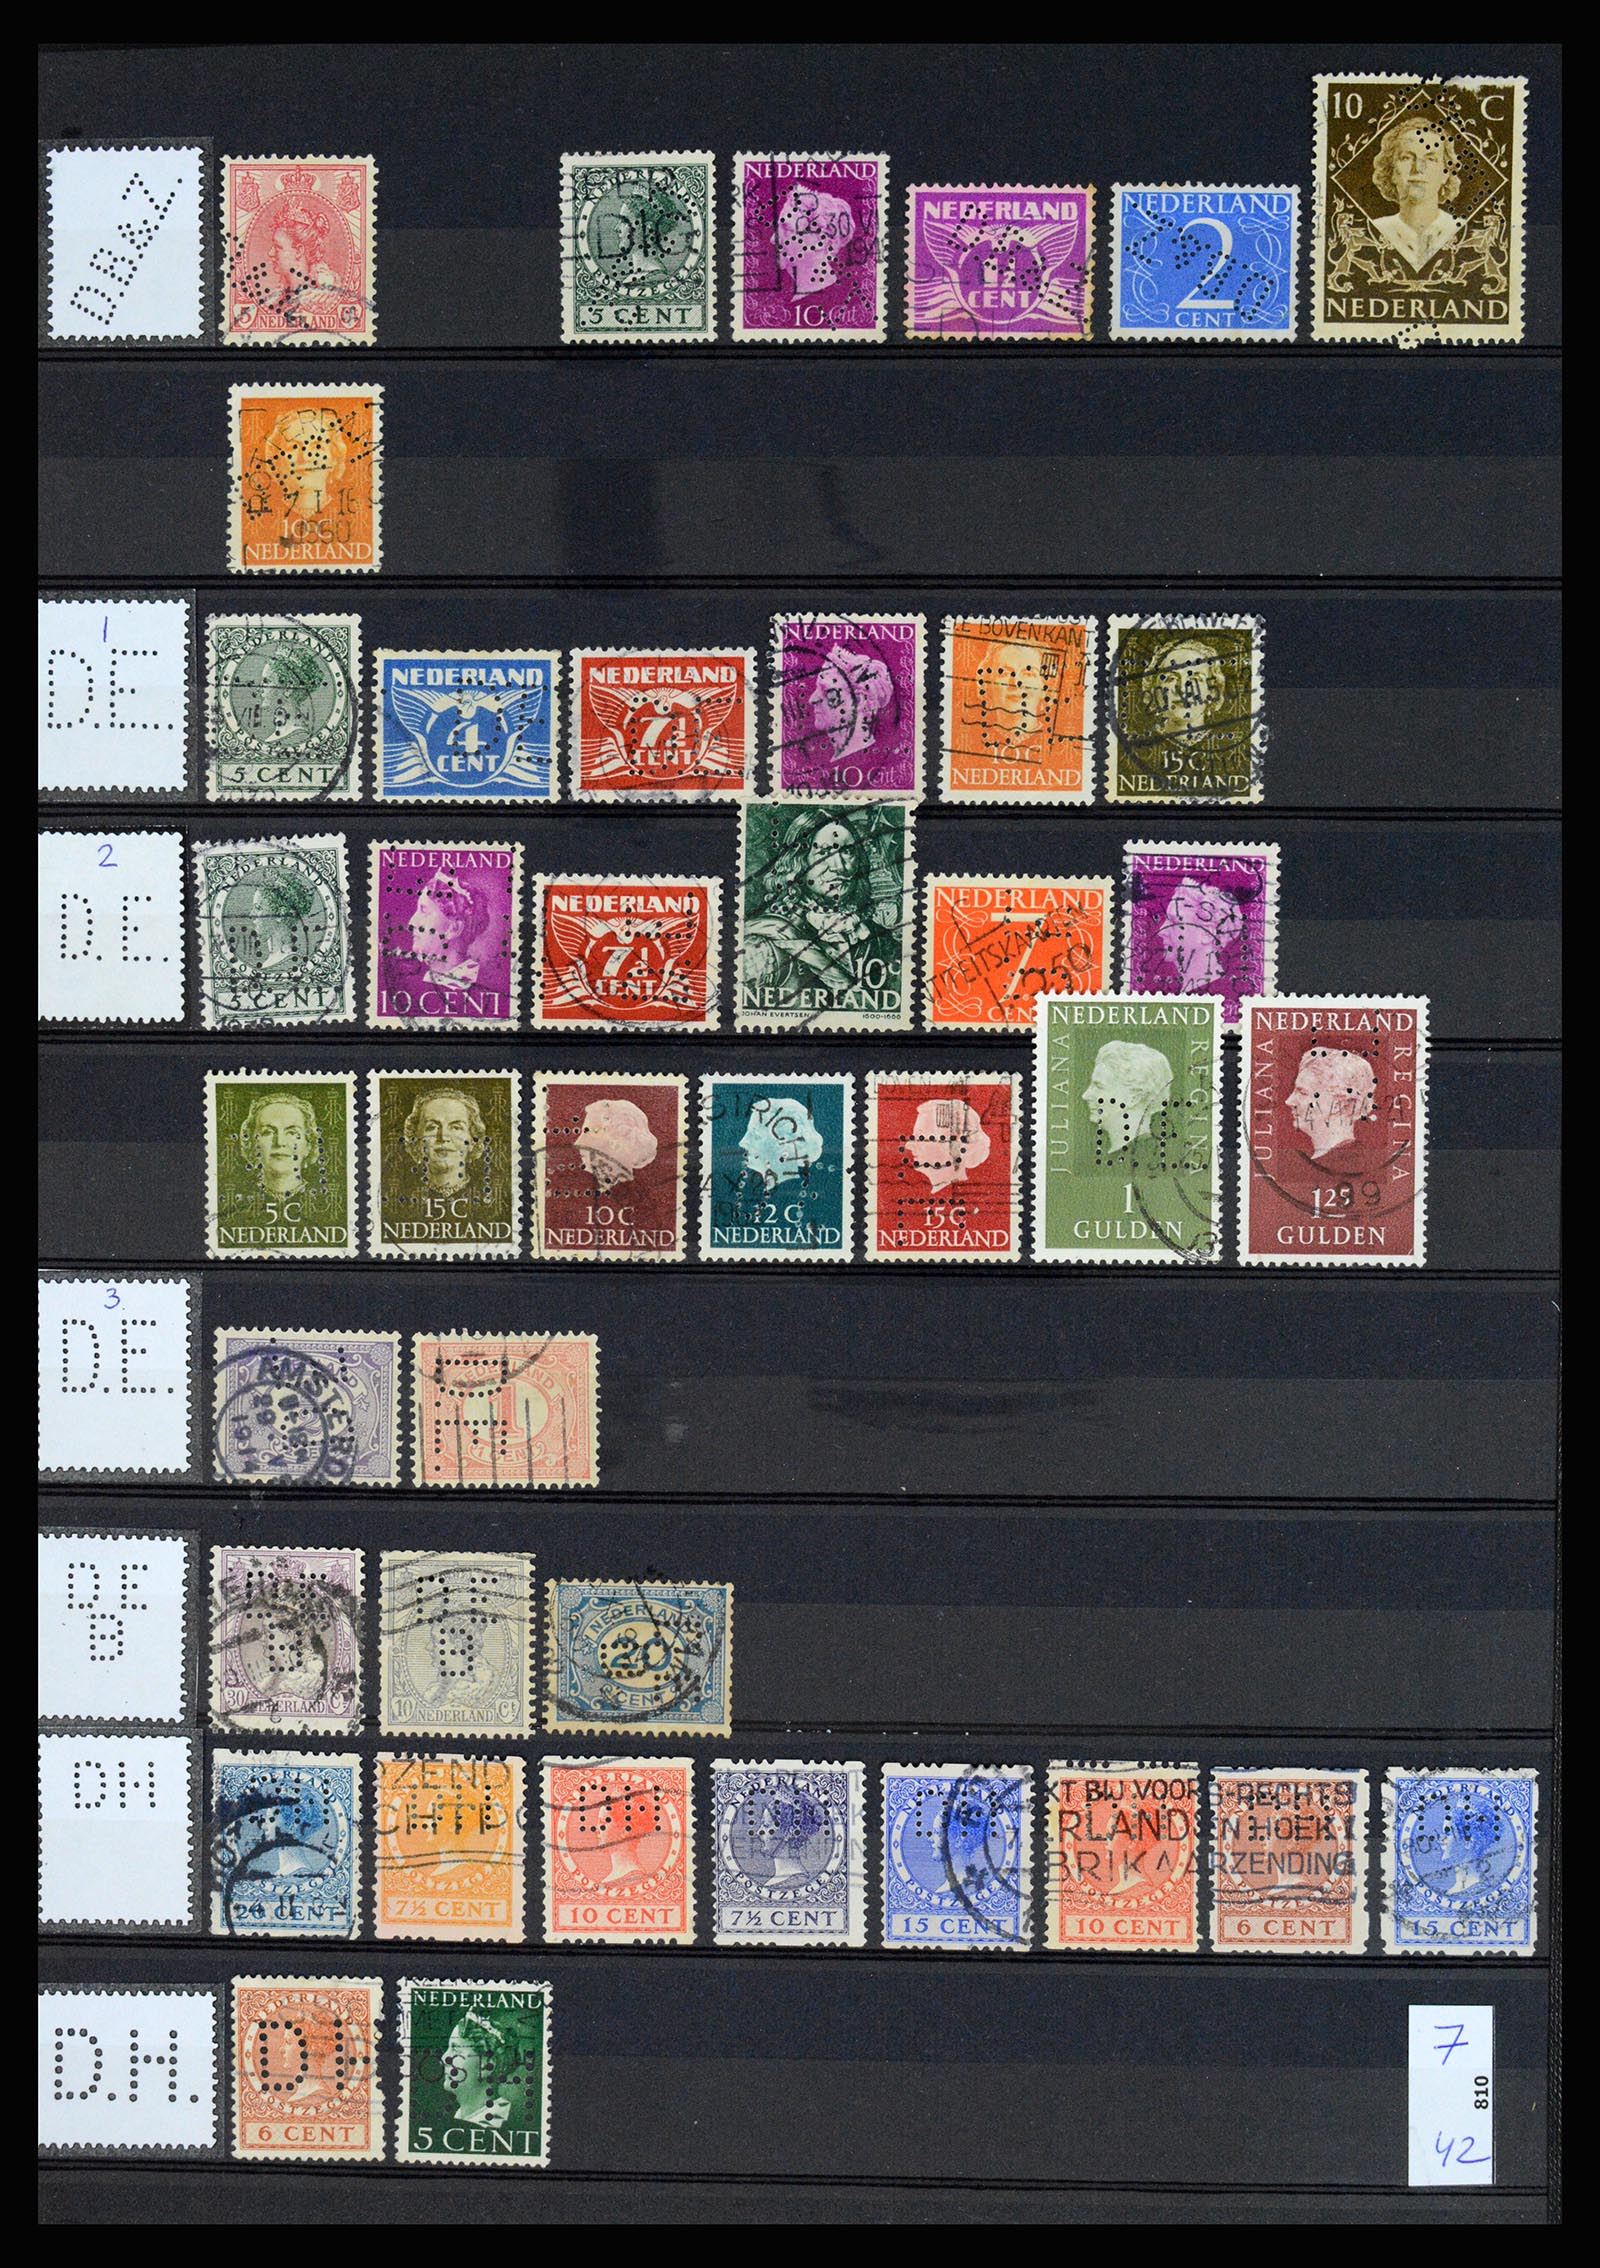 37183 009 - Stamp collection 37183 Netherlands perfins 1872-1960.